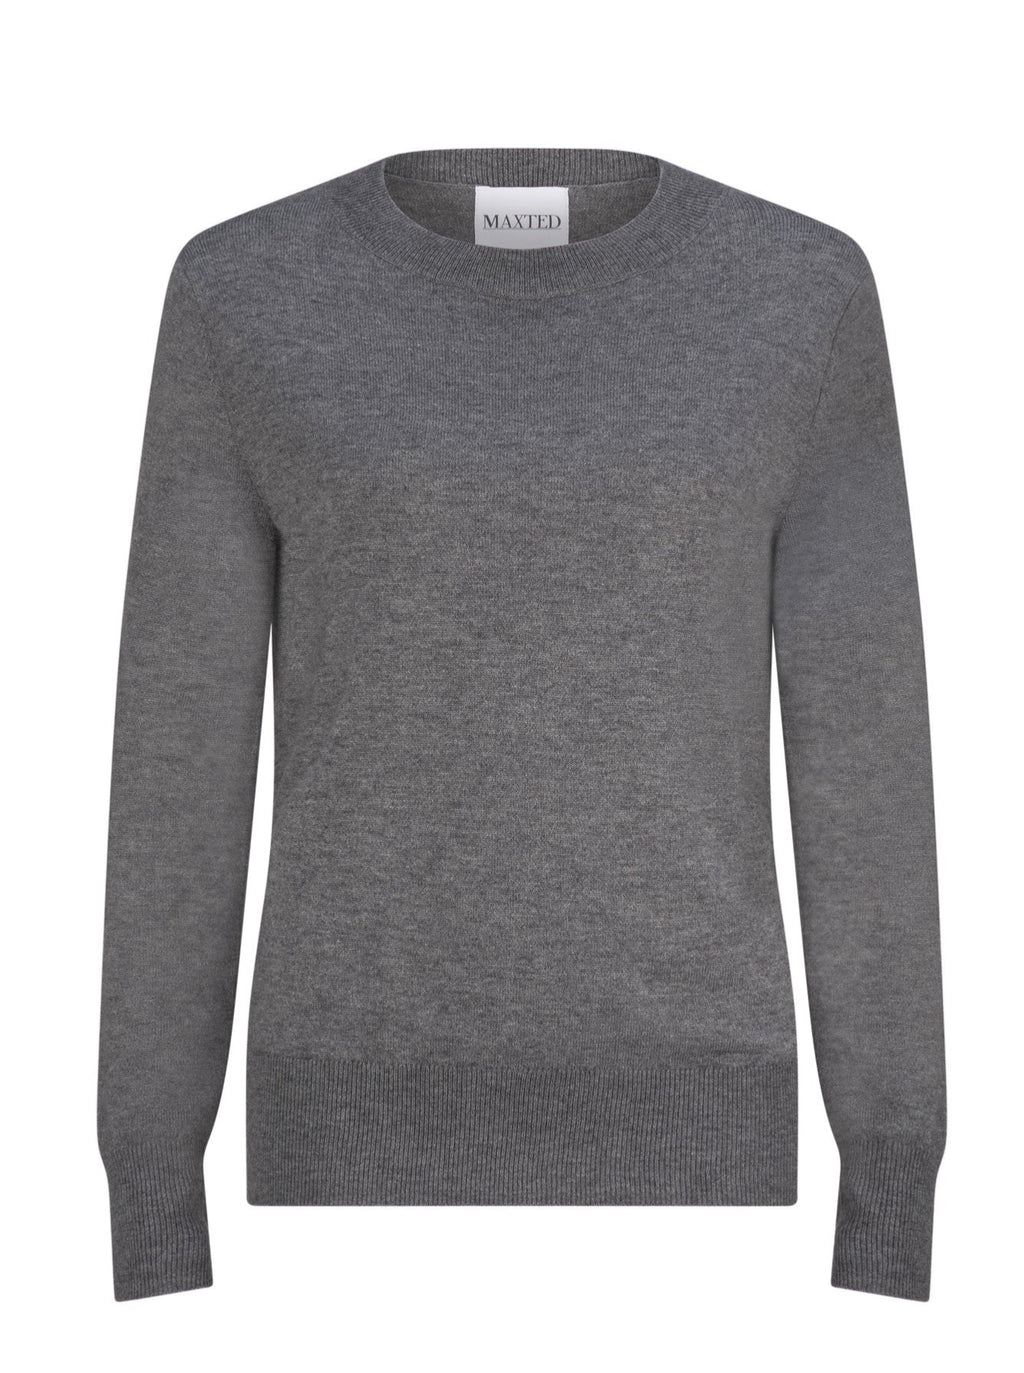 MAXTED - Fine Knit Pullover - Charcoal